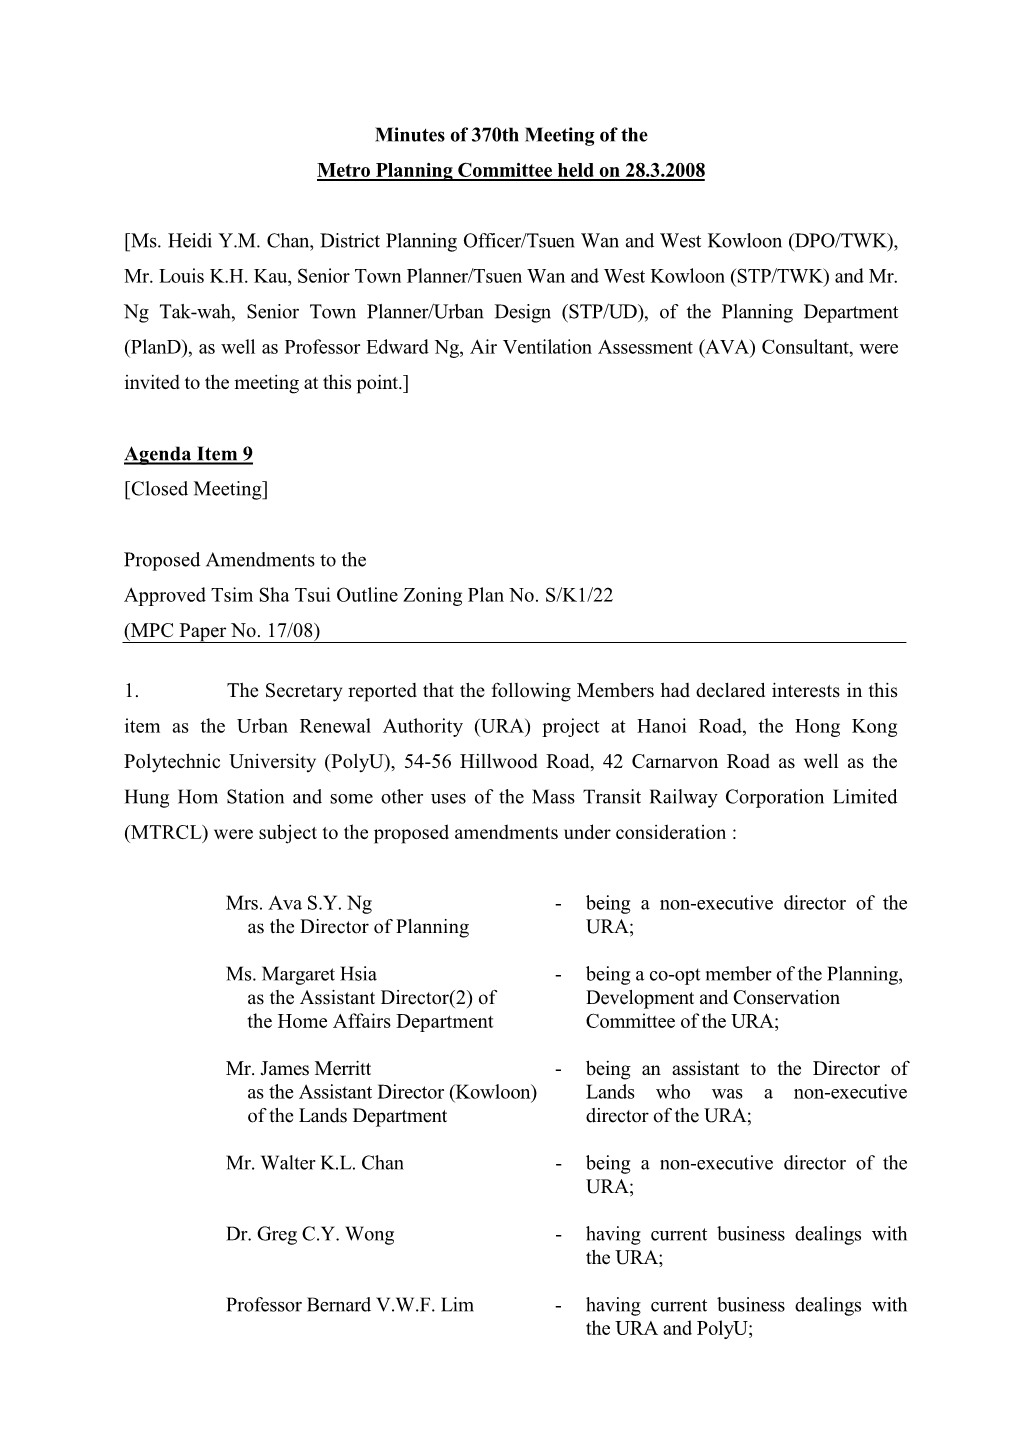 Minutes of 370Th Meeting of the Metro Planning Committee Held on 28.3.2008